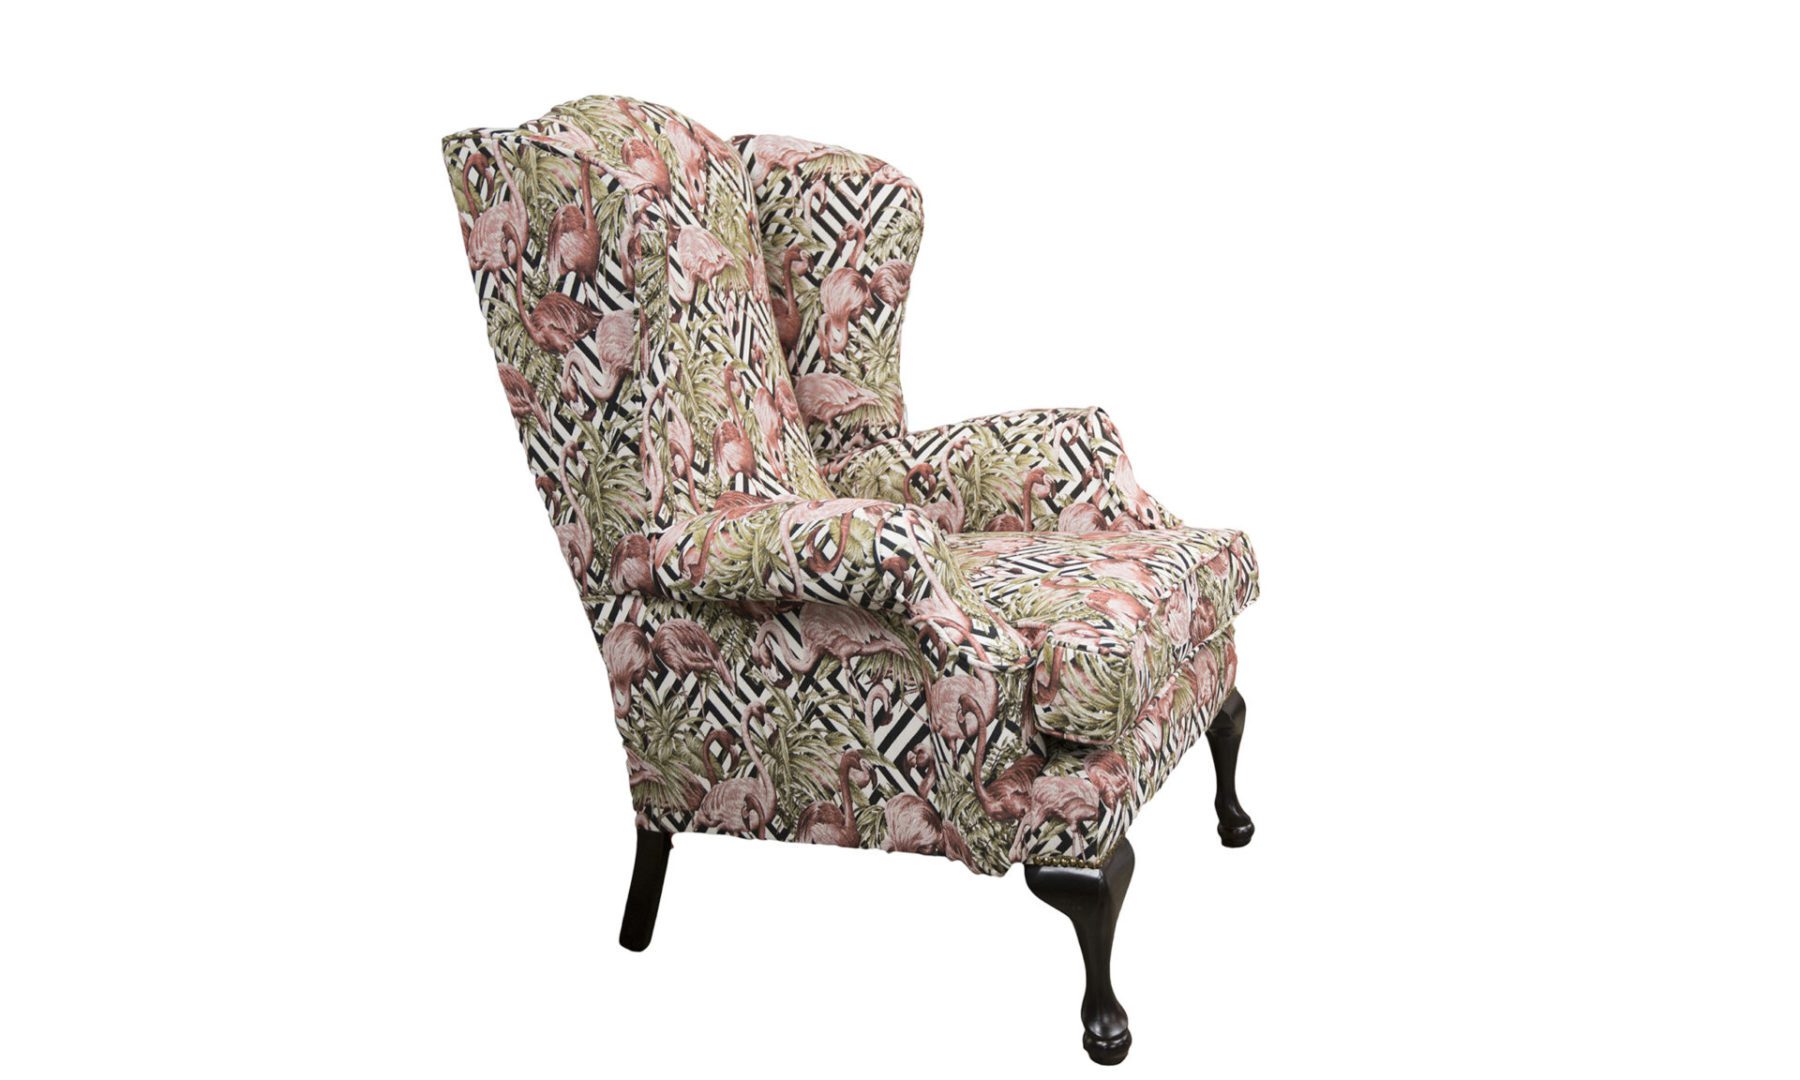 Queen Anne Chair in Flamingo Brick, Gold Collection Fabric